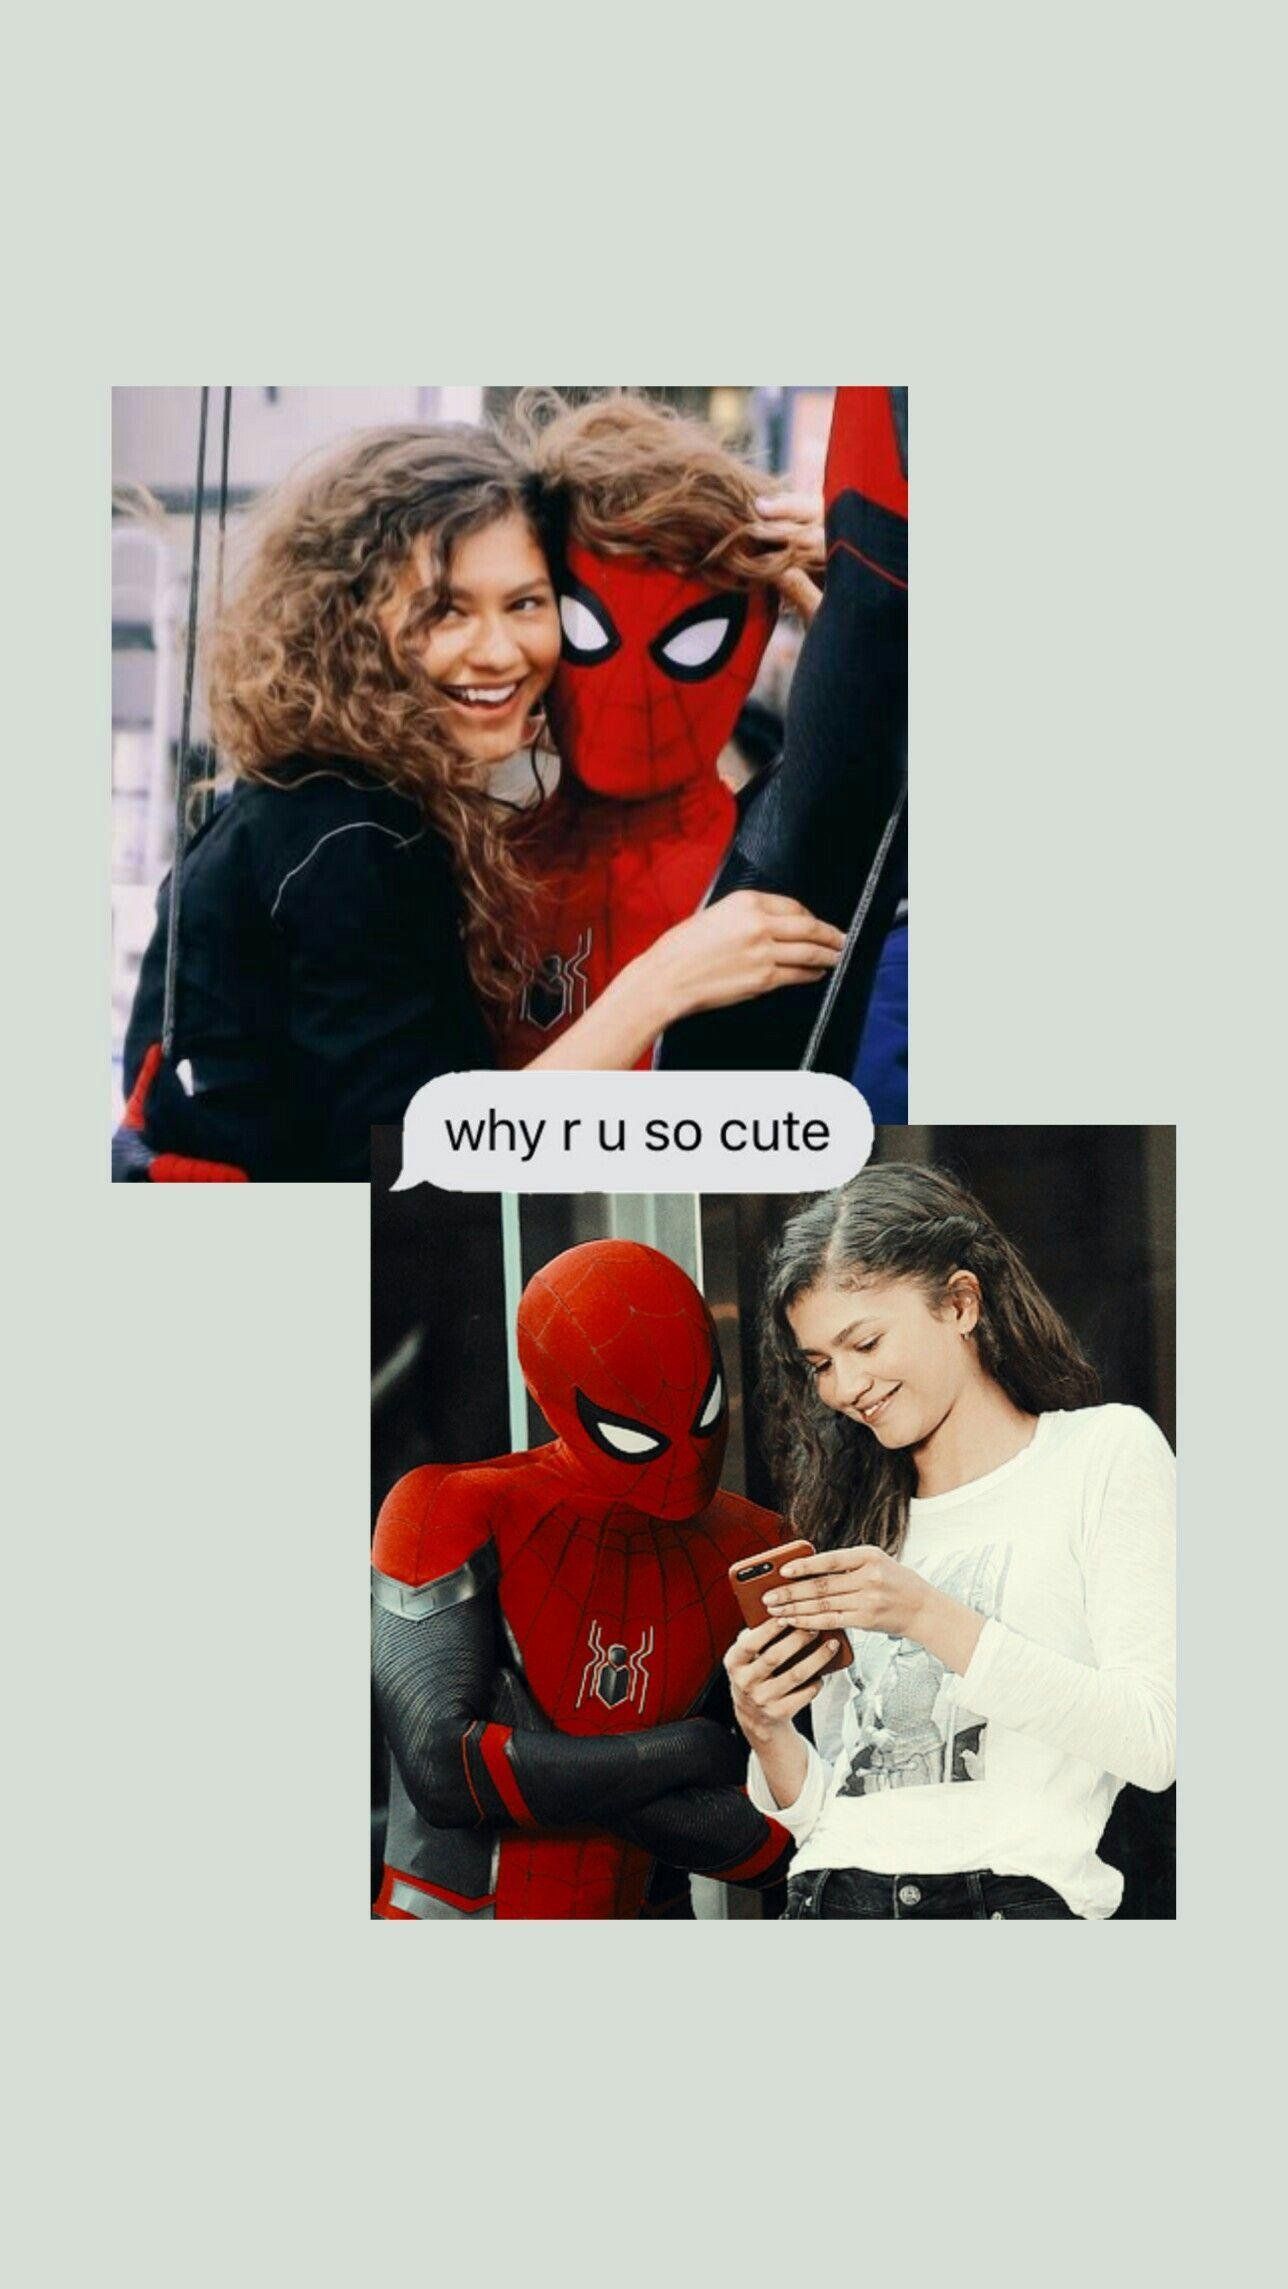 Collage of Zendaya and Tom Holland from the Spiderman movies - Zendaya, Tom Holland